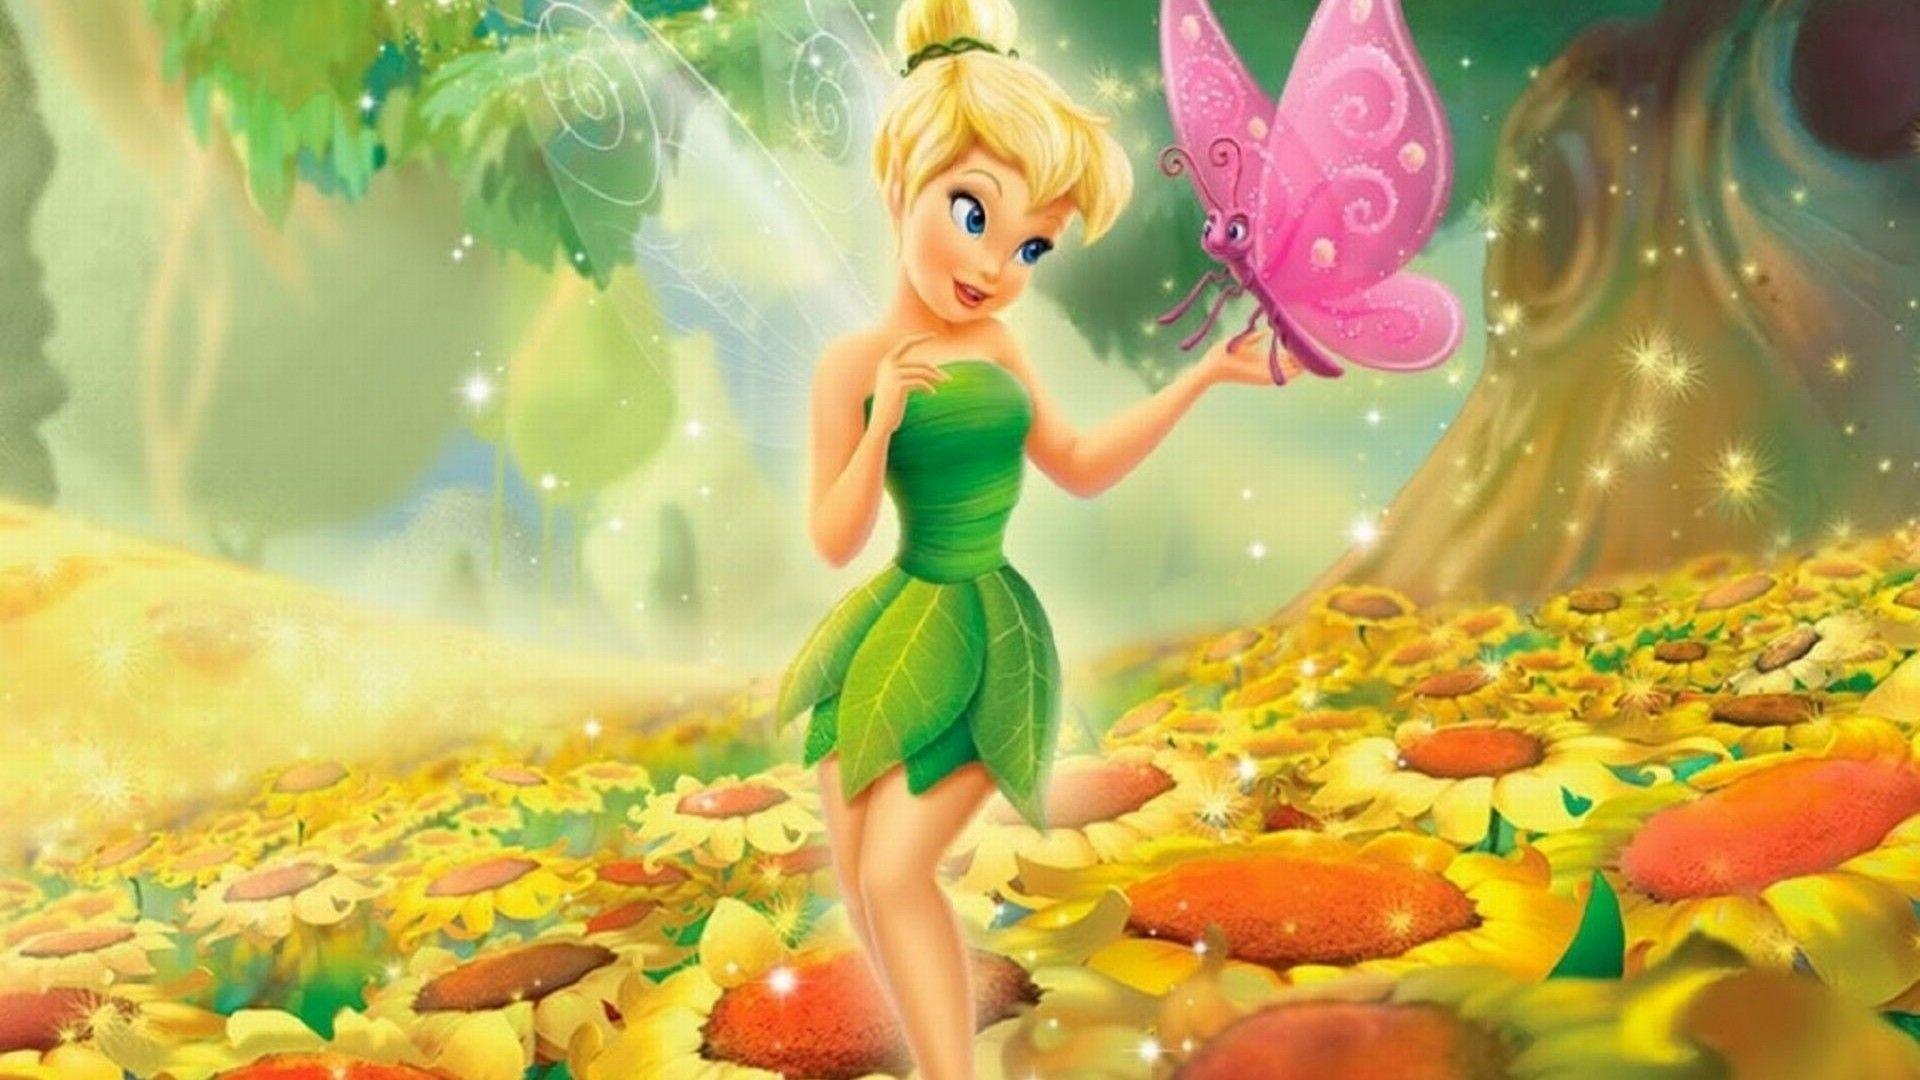 Tinker Bell - wide 1